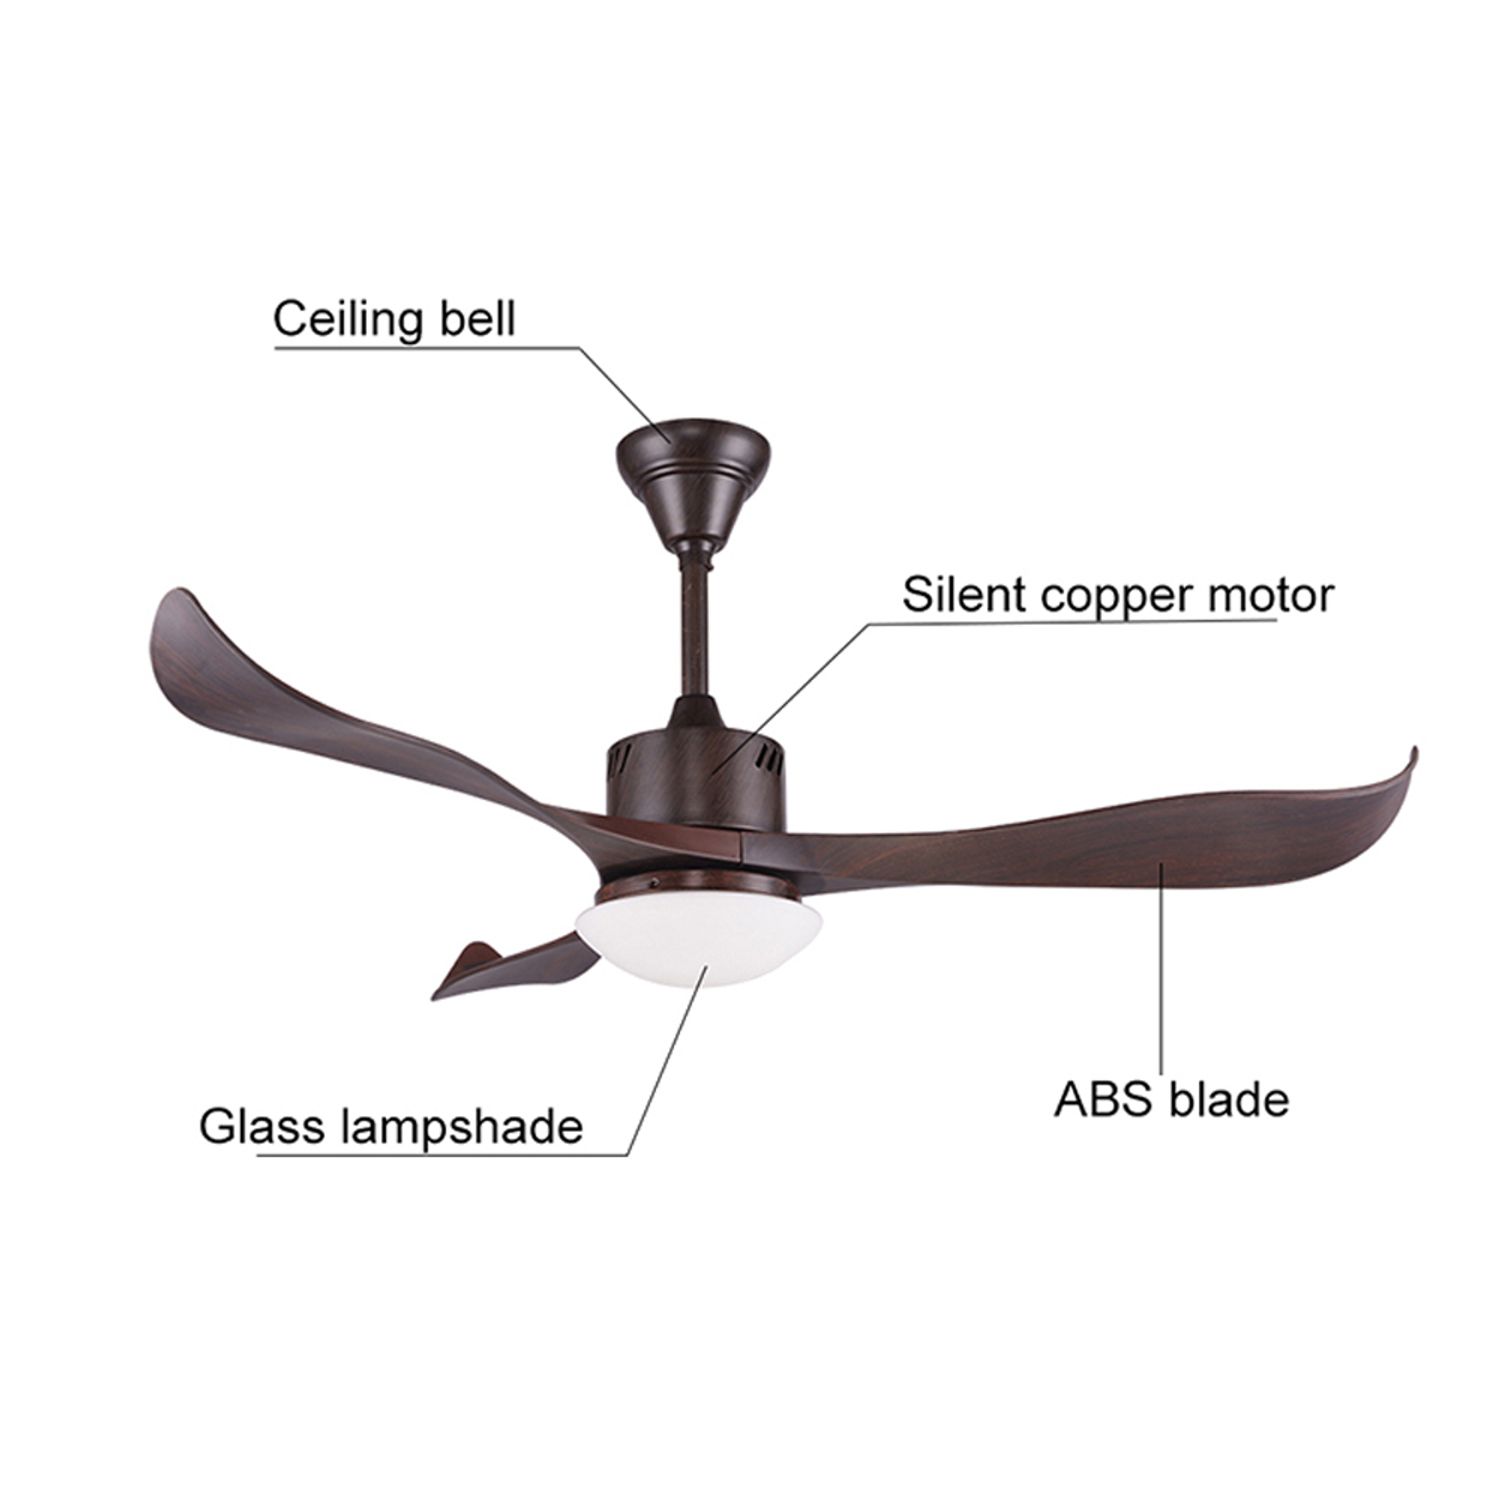 different parts of KBS 52" Sleek Low Noise Ceiling Fan with Light: ceiling bell, silent copper motor, glass lampshade, abs blade